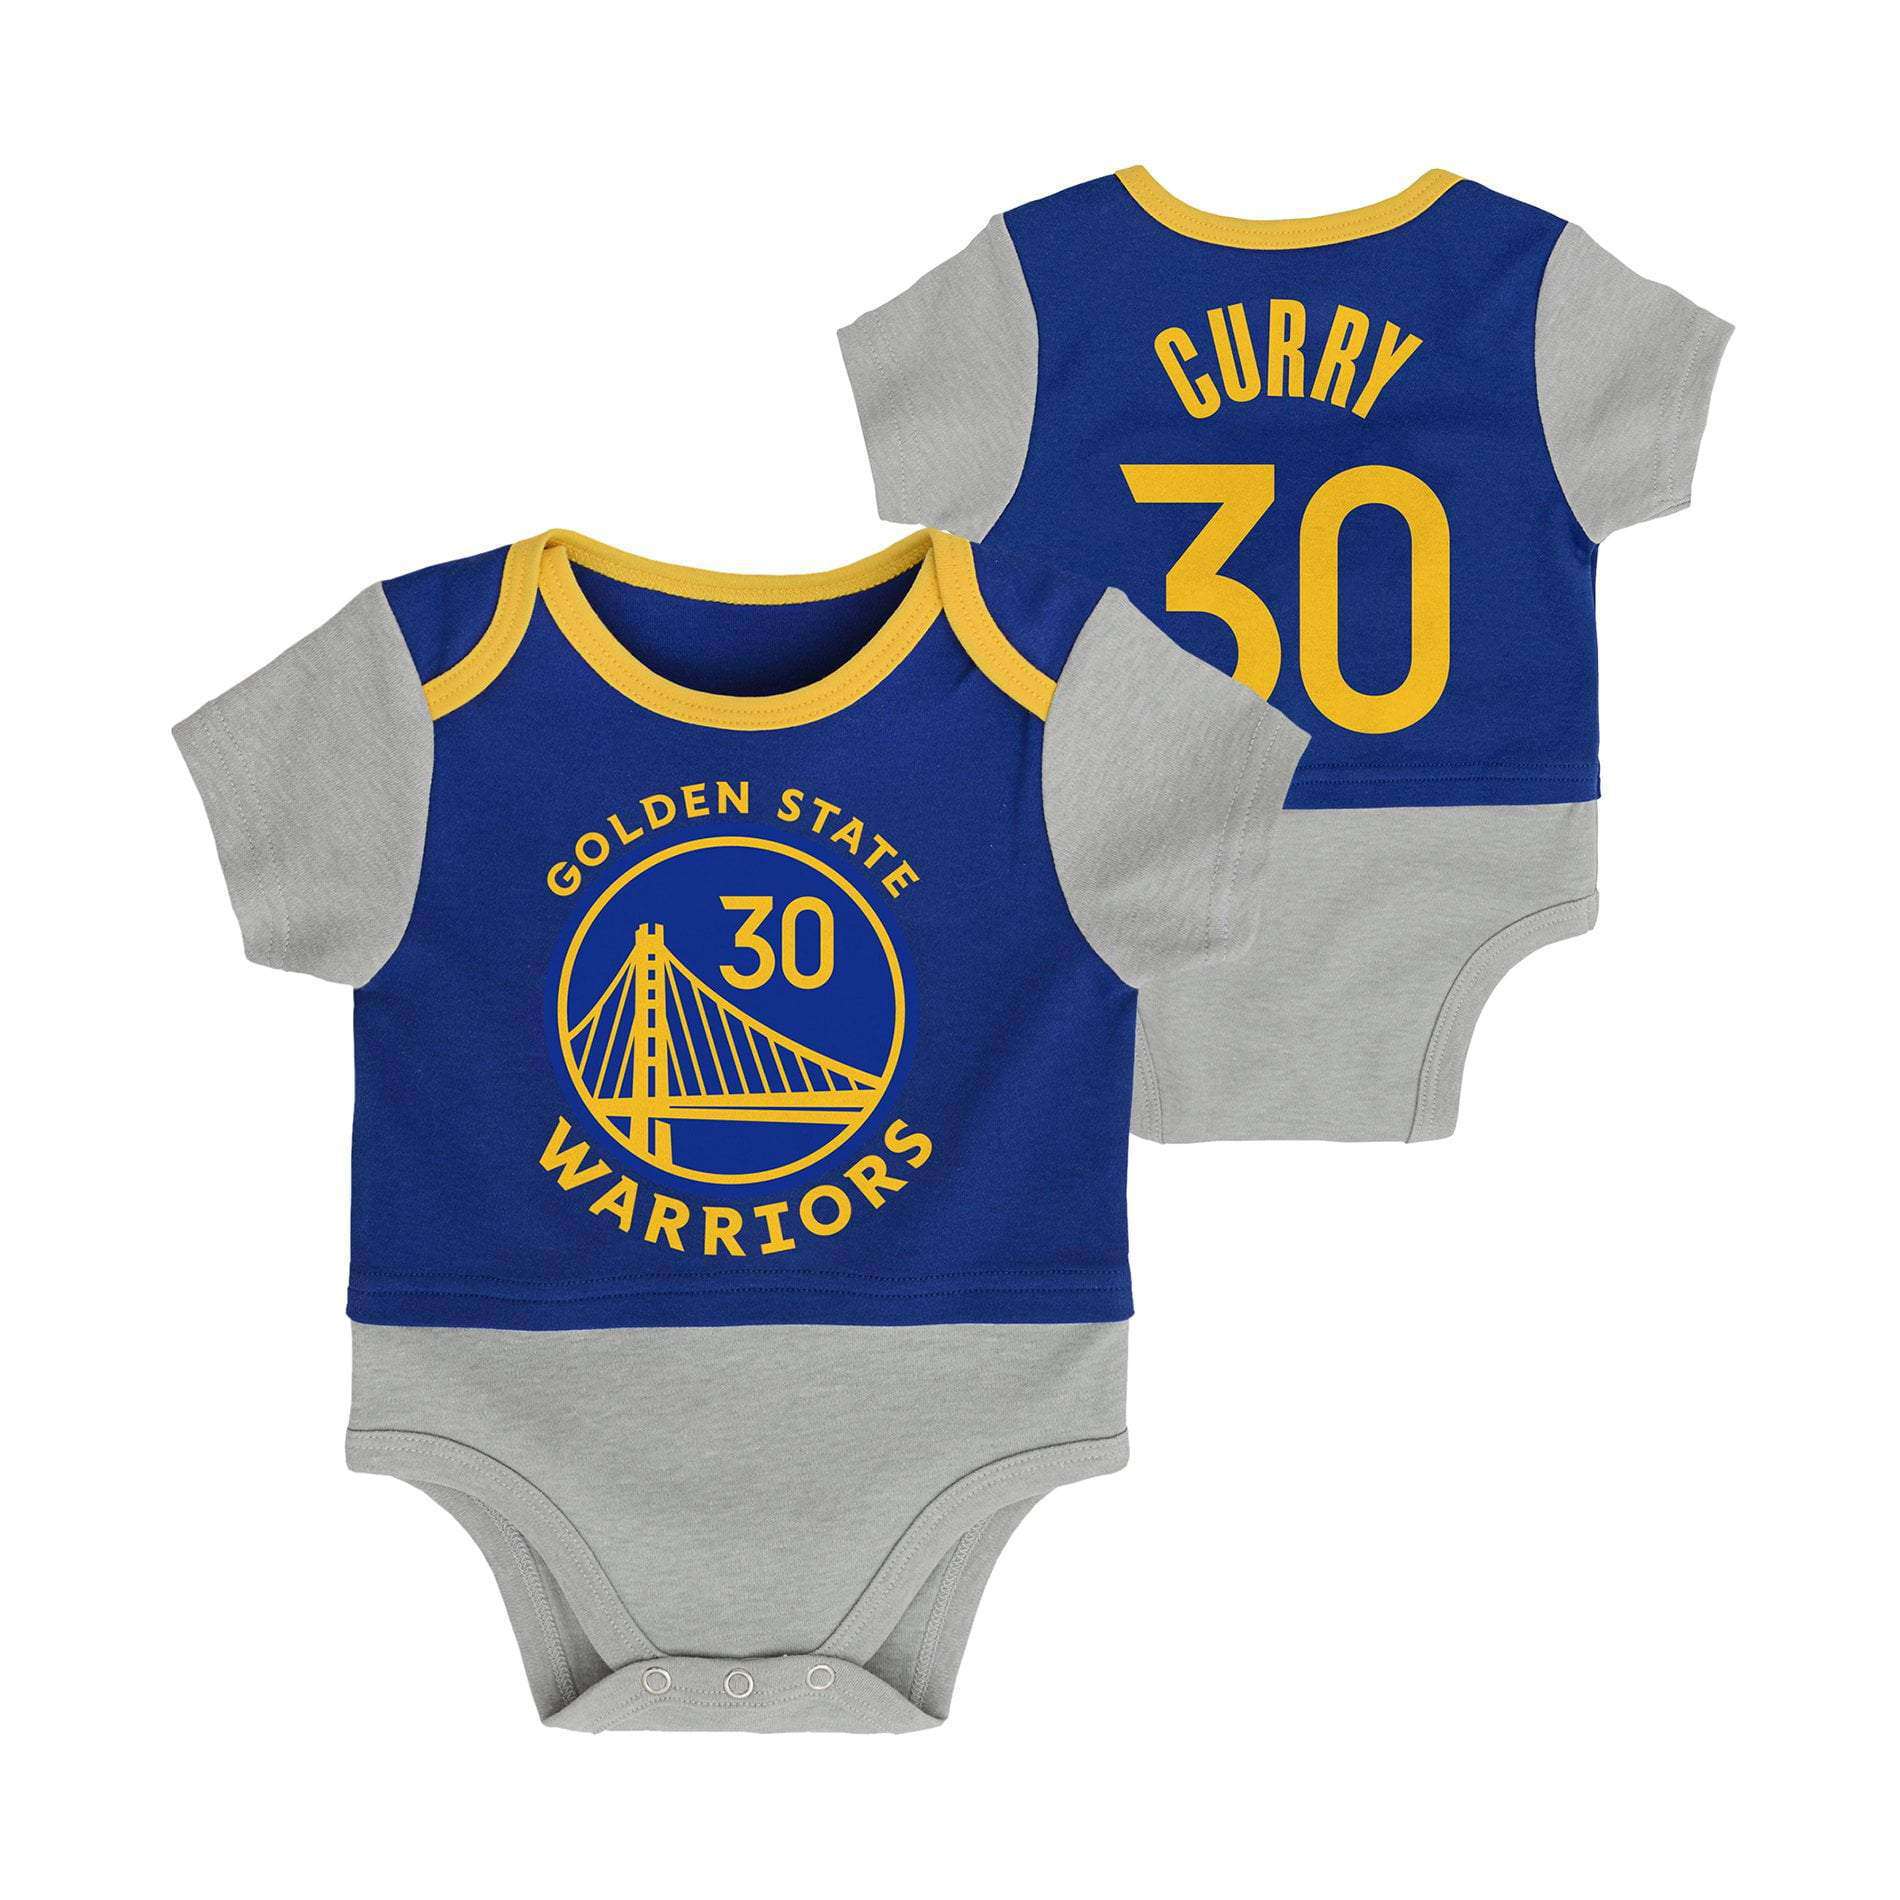 stephen curry baby jersey